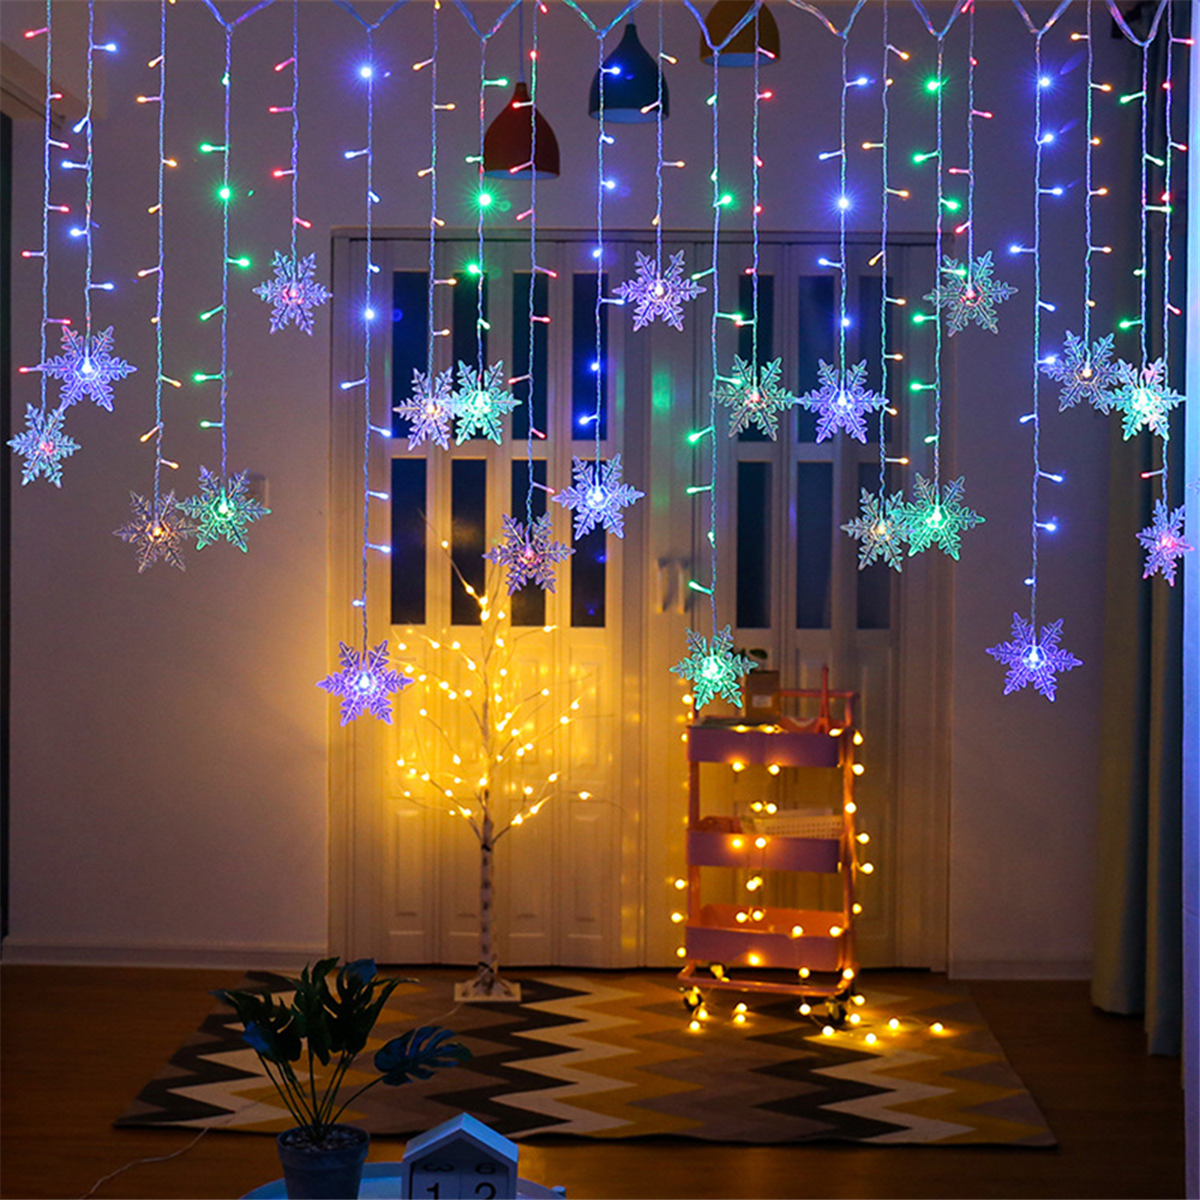 96-LED-Snowflake-String-Curtain-Window-Lights-Colorful-Wedding-Lamp-8-Modes-1817206-3